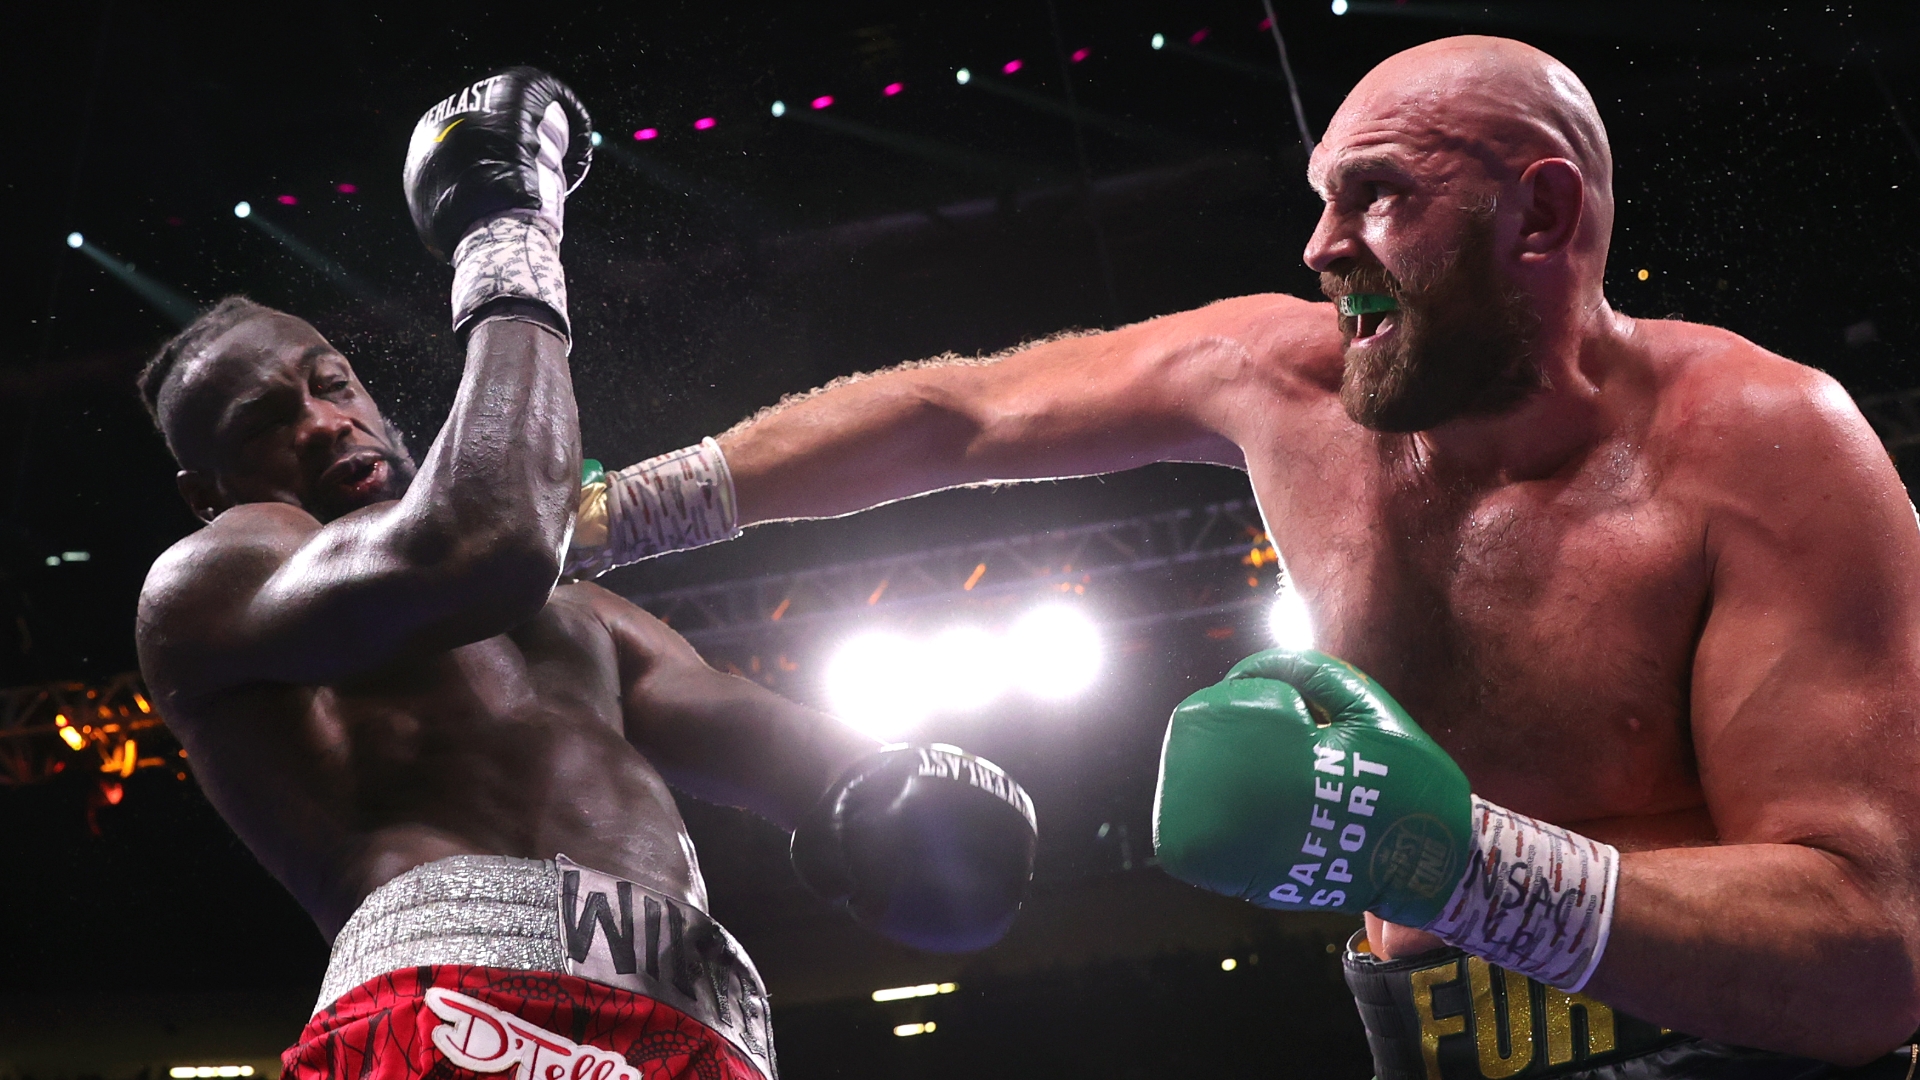 Tyson Fury wins epic clash with Deontay Wilder in trilogy match - Stream the Video